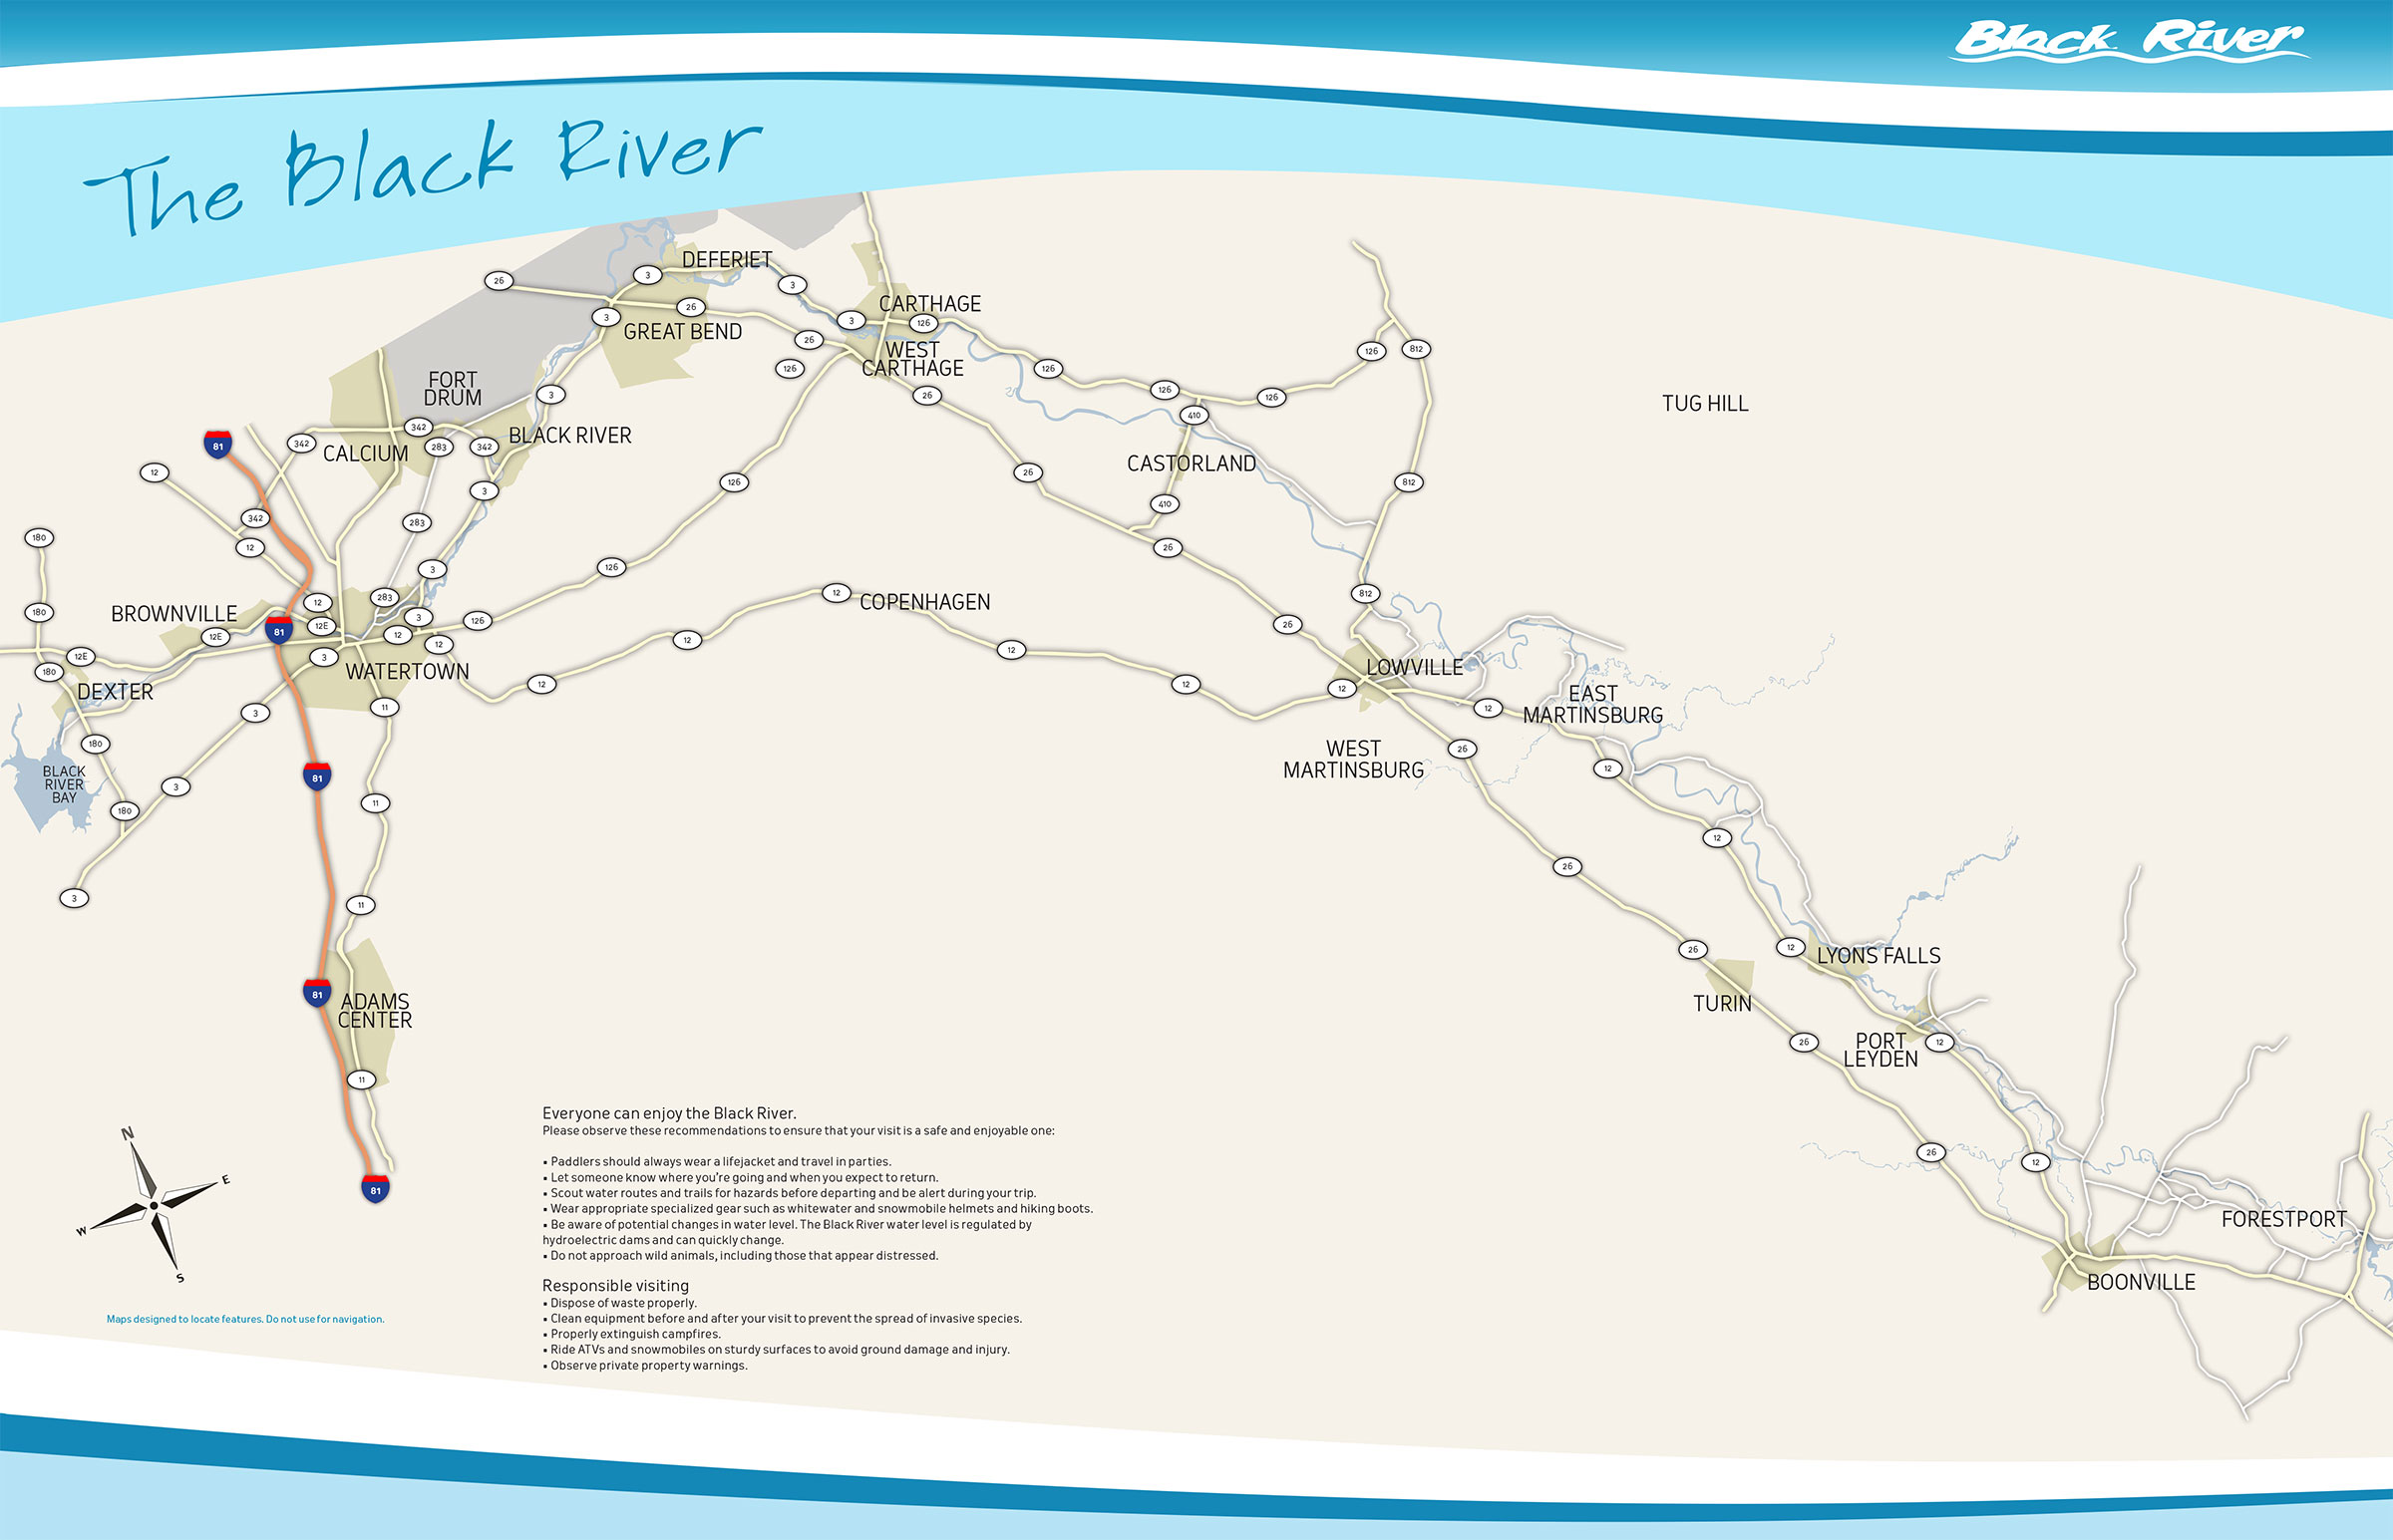 Black River Overview Map